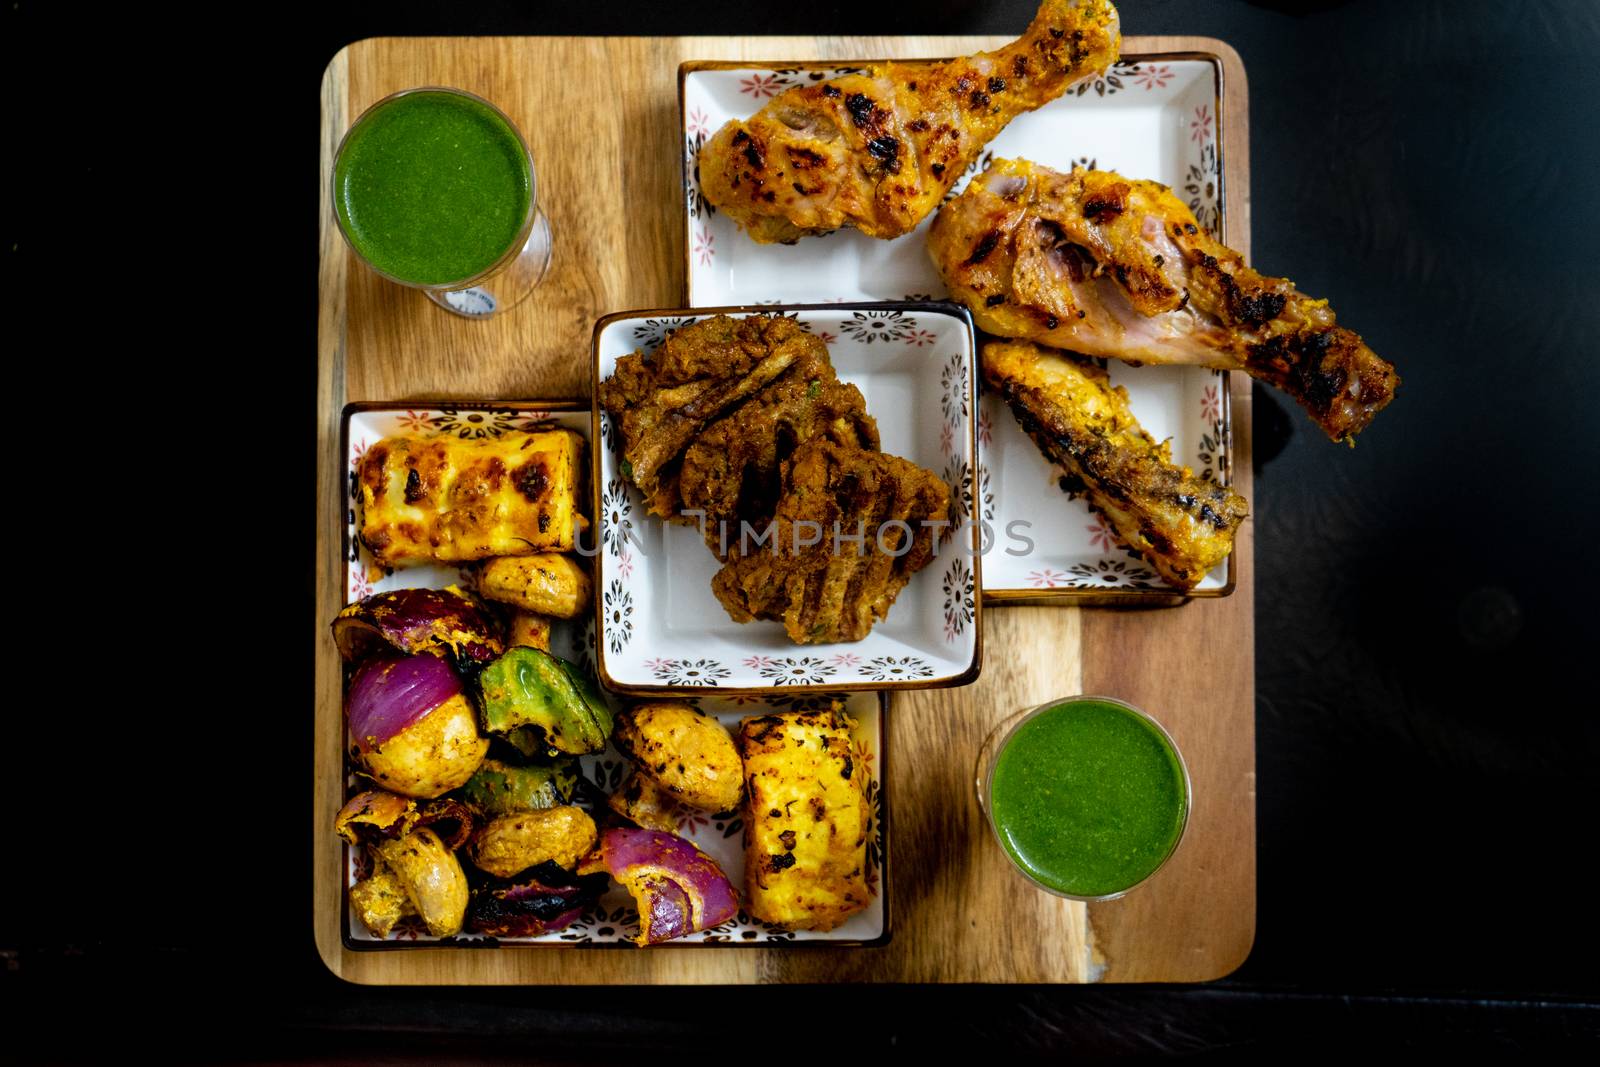 shot of delicious chicken drum sticks legs, lollypop, mutton patties, cottage cheese, mint chutney in glasses for a punjabi north indian barbeque meal. A perfect mix of meat and vegetarian elements in mughal style